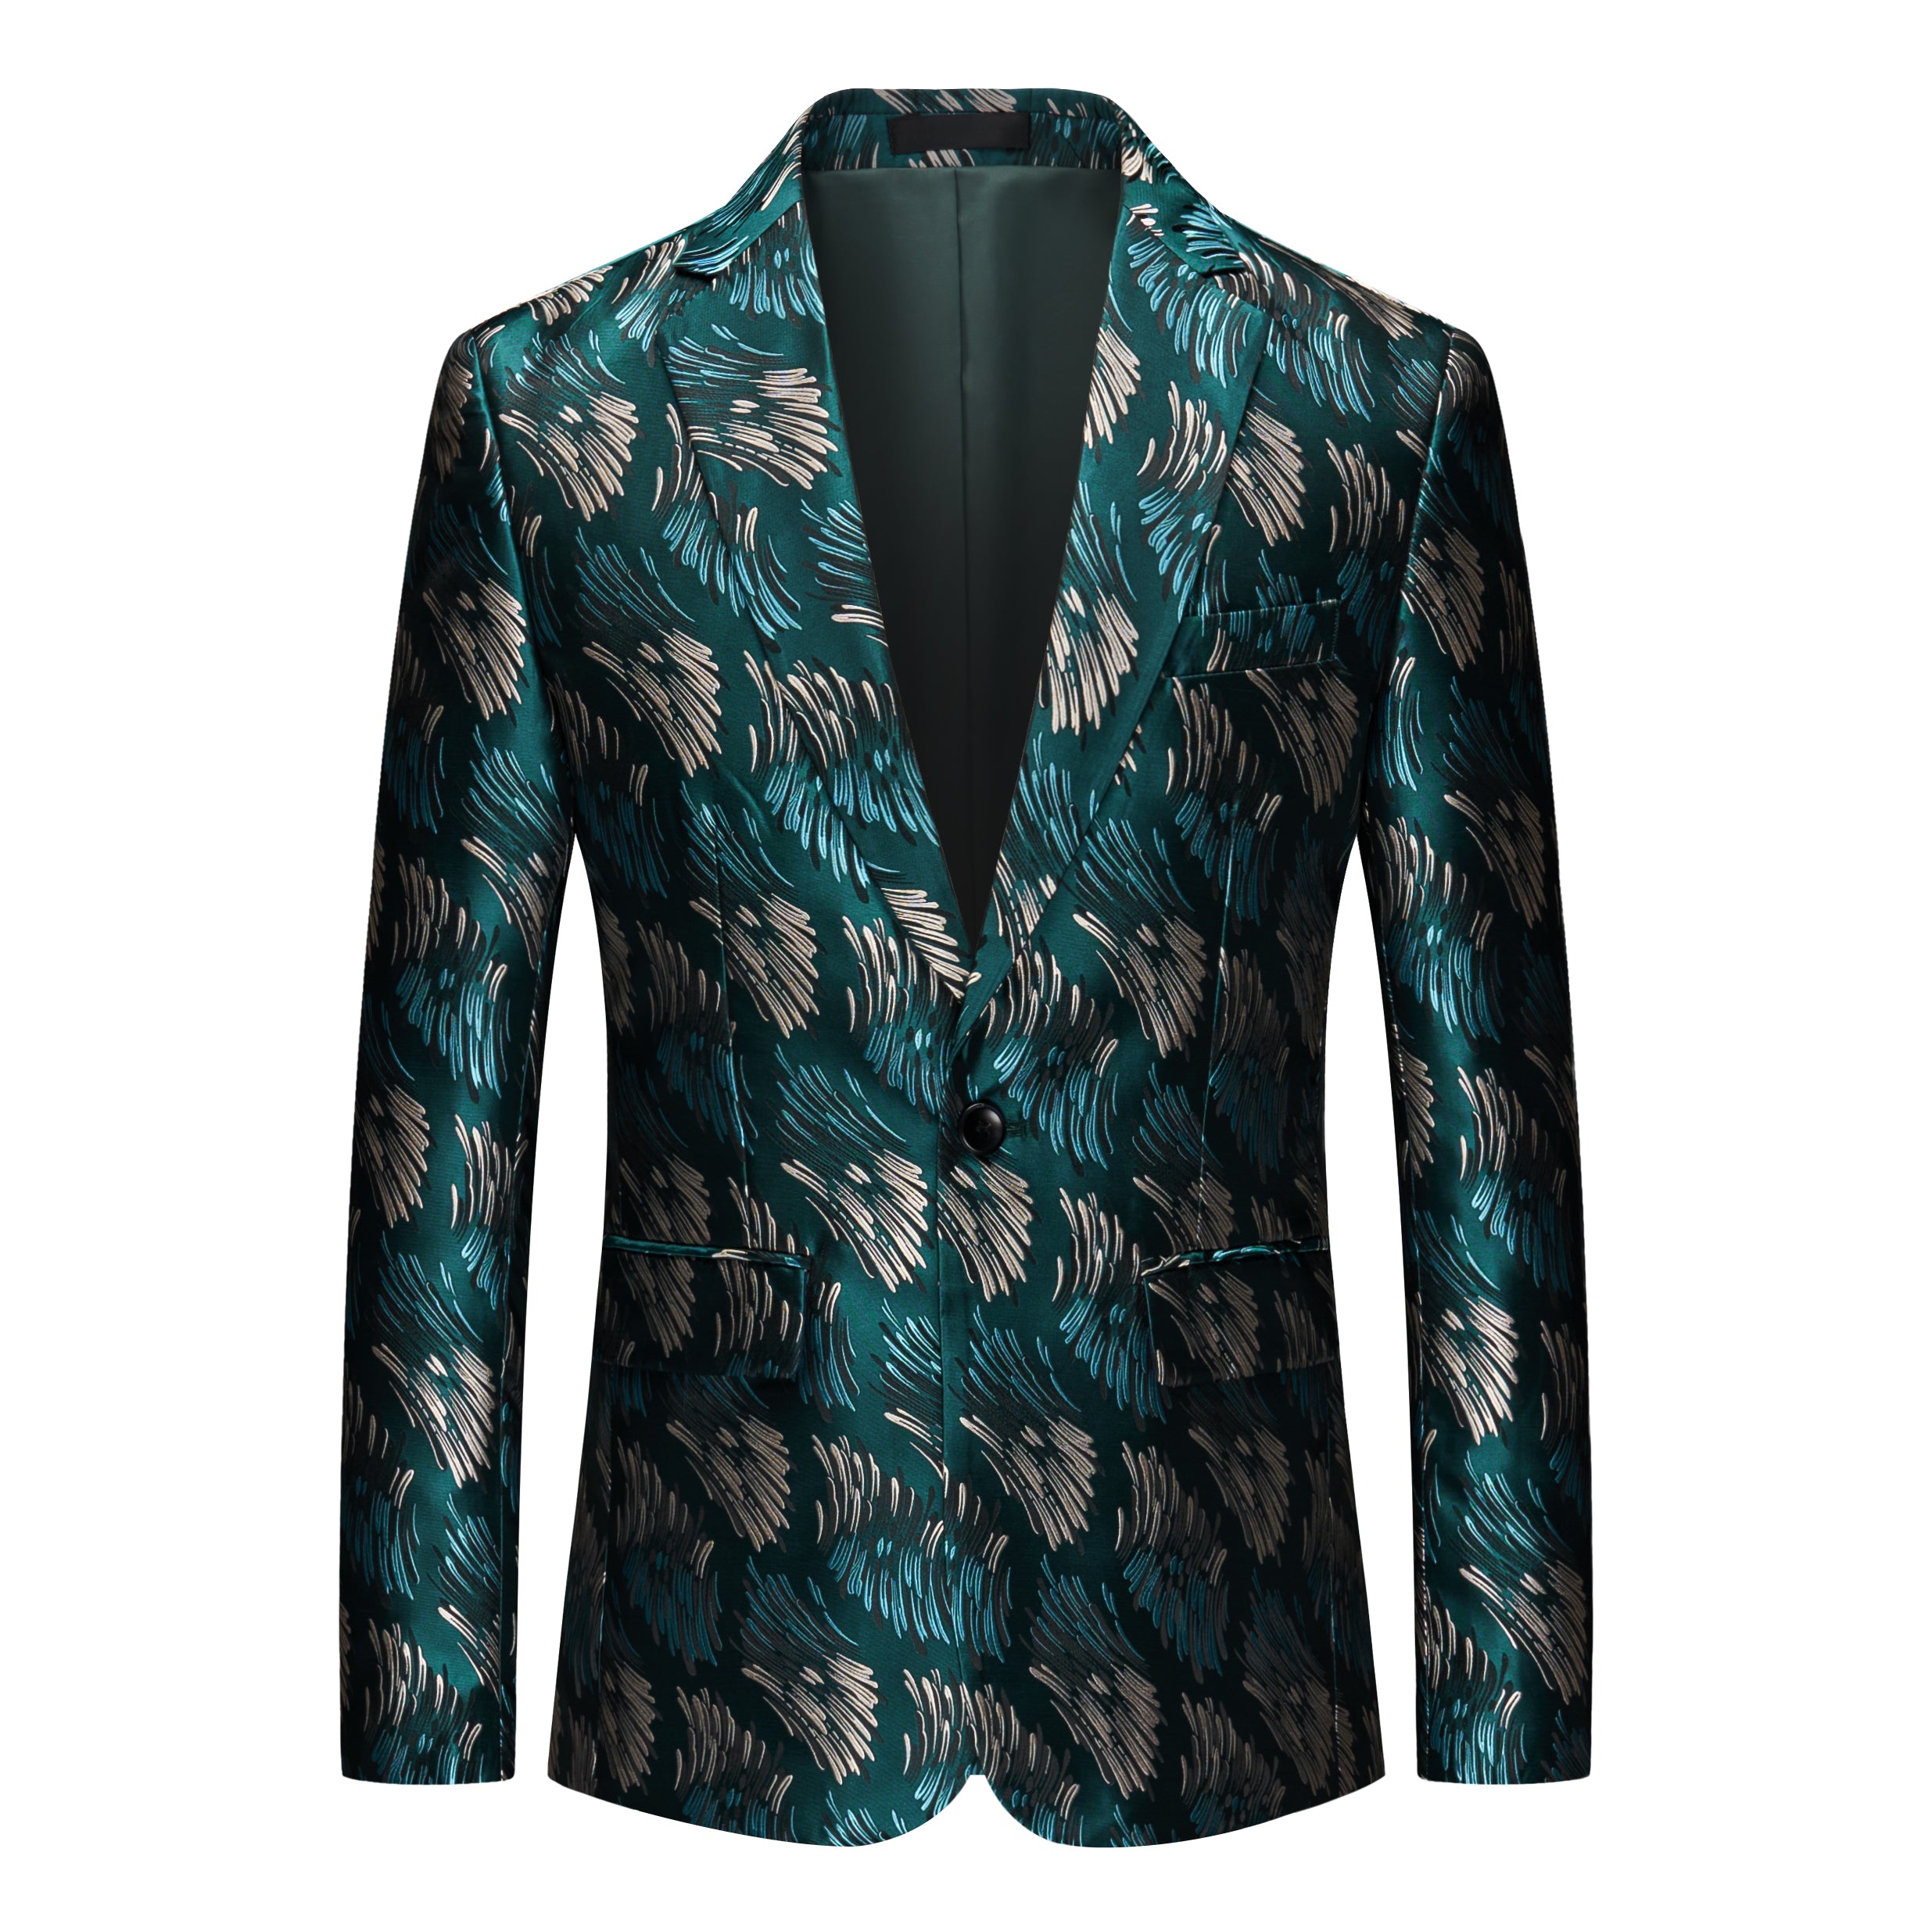 Men's Blazer Floral Printed Casual One Button Sports Coat